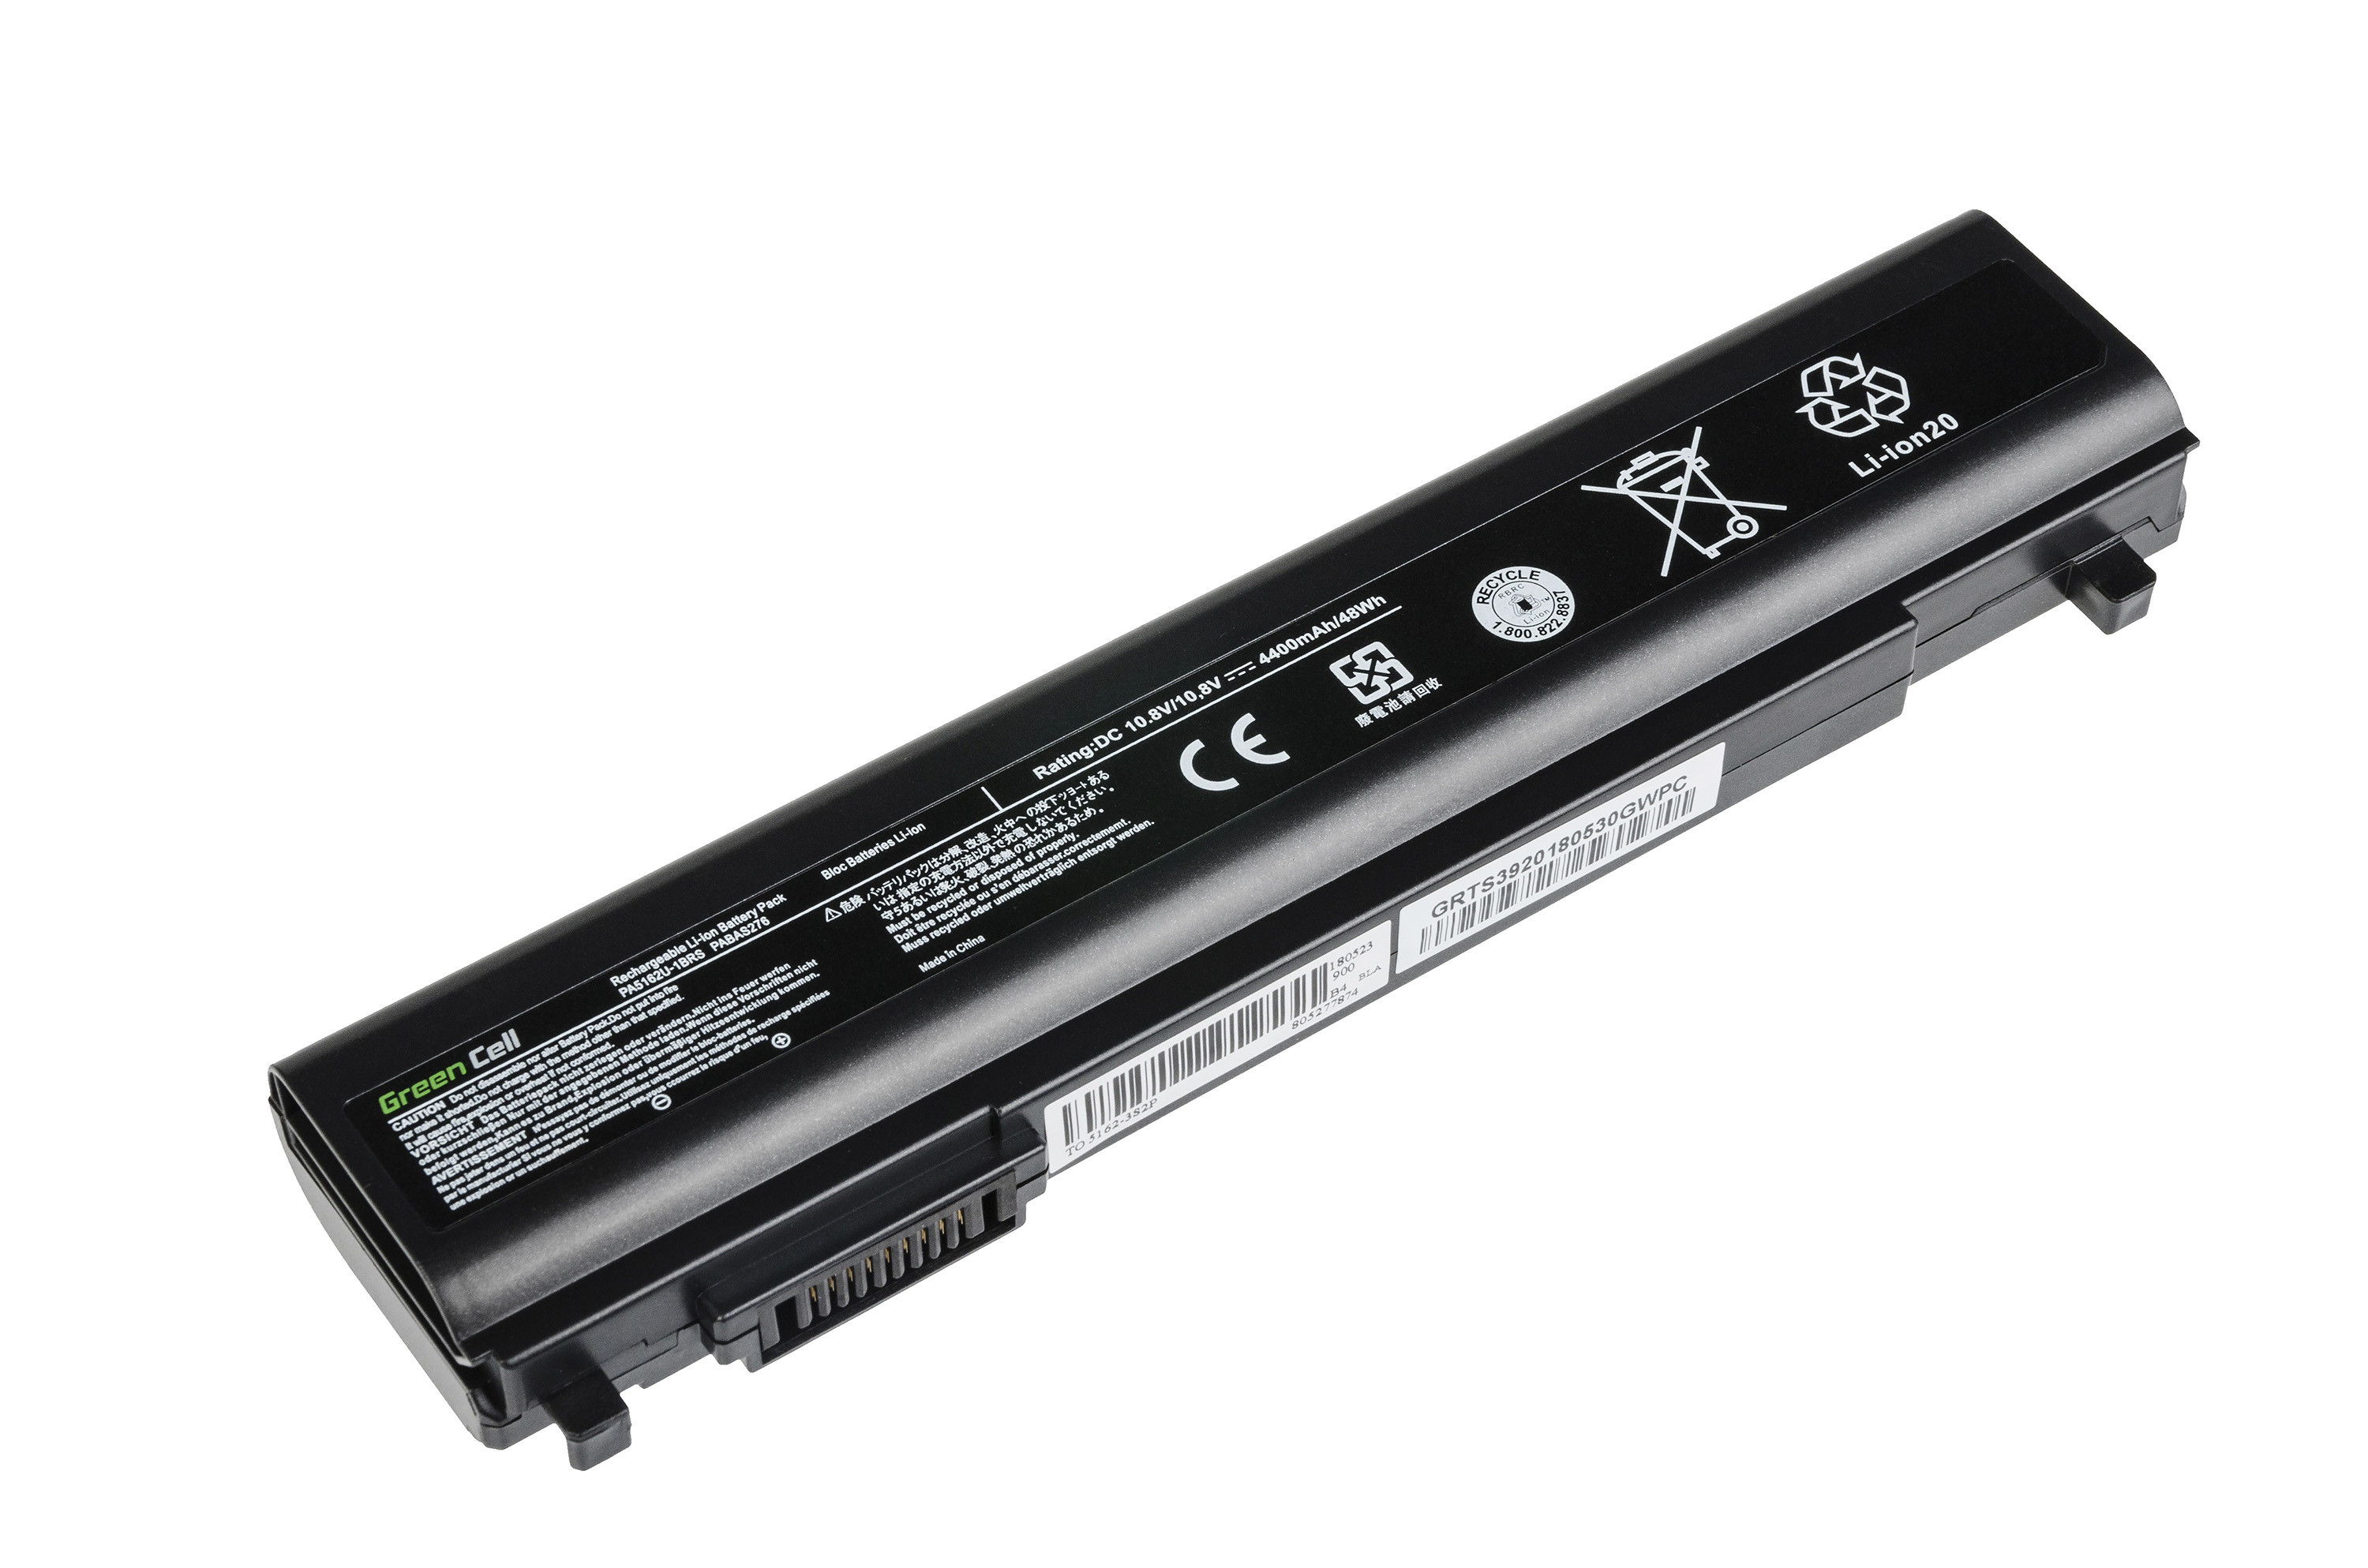 Green Cell Battery PA5162U-1BRS for Toshiba Portege R30 R30-A R30-A-134 R30-A-14K R30-A-17K R30-A-15D R30-A-1C5